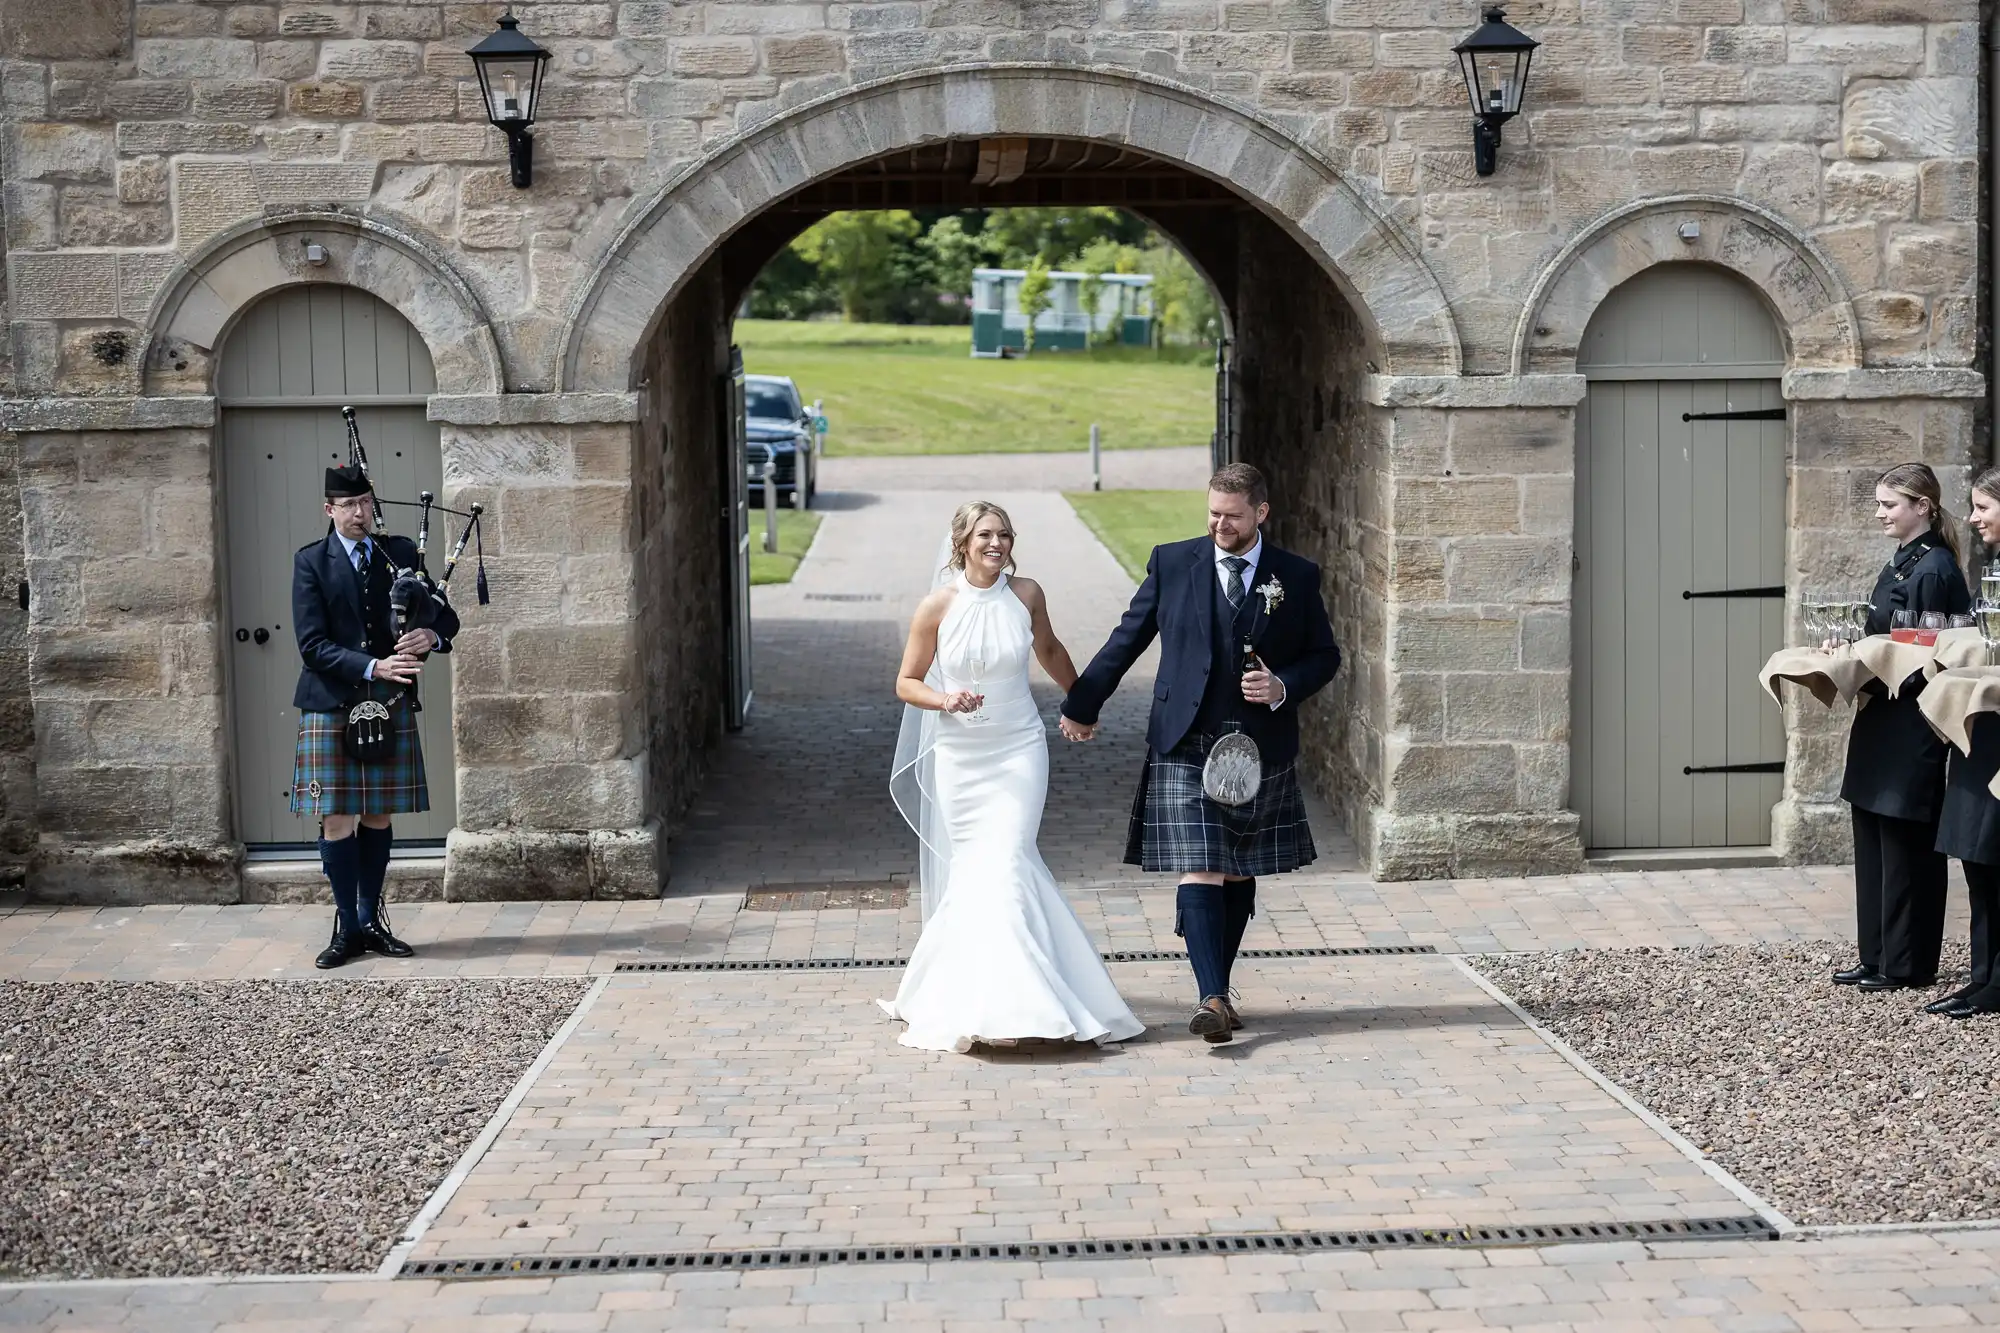 A bride and groom, holding hands and smiling, walk through an arched gateway, flanked by two people in traditional Scottish kilts.